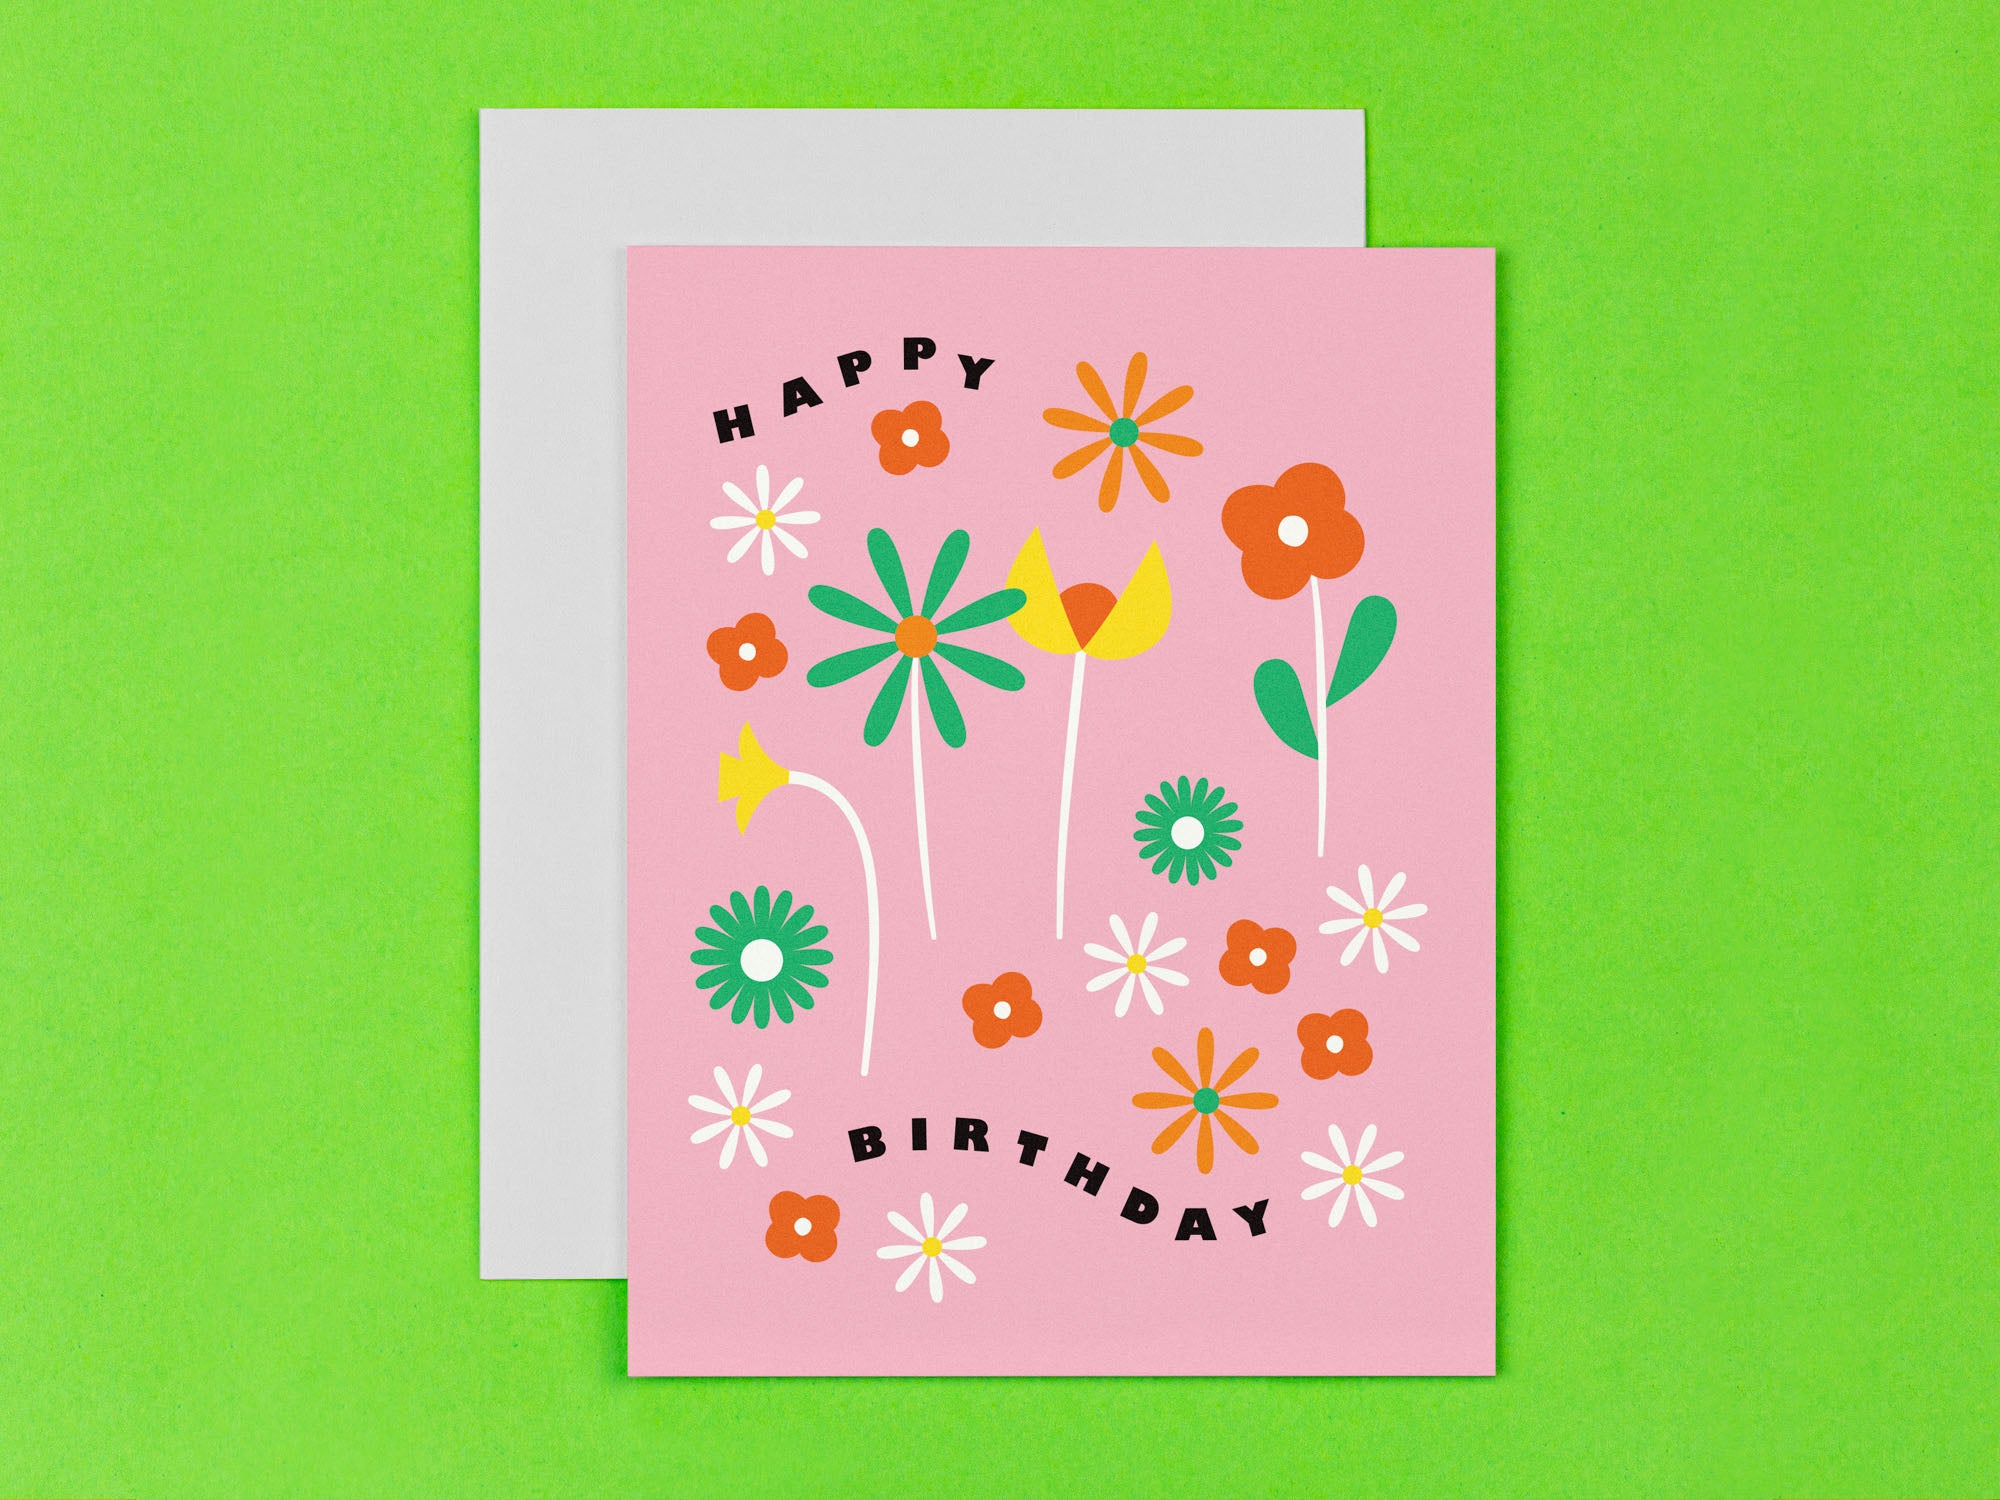 Floral happy birthday card with mid century style floral illustration. Made in USA by My Darlin' @mydarlin_bk